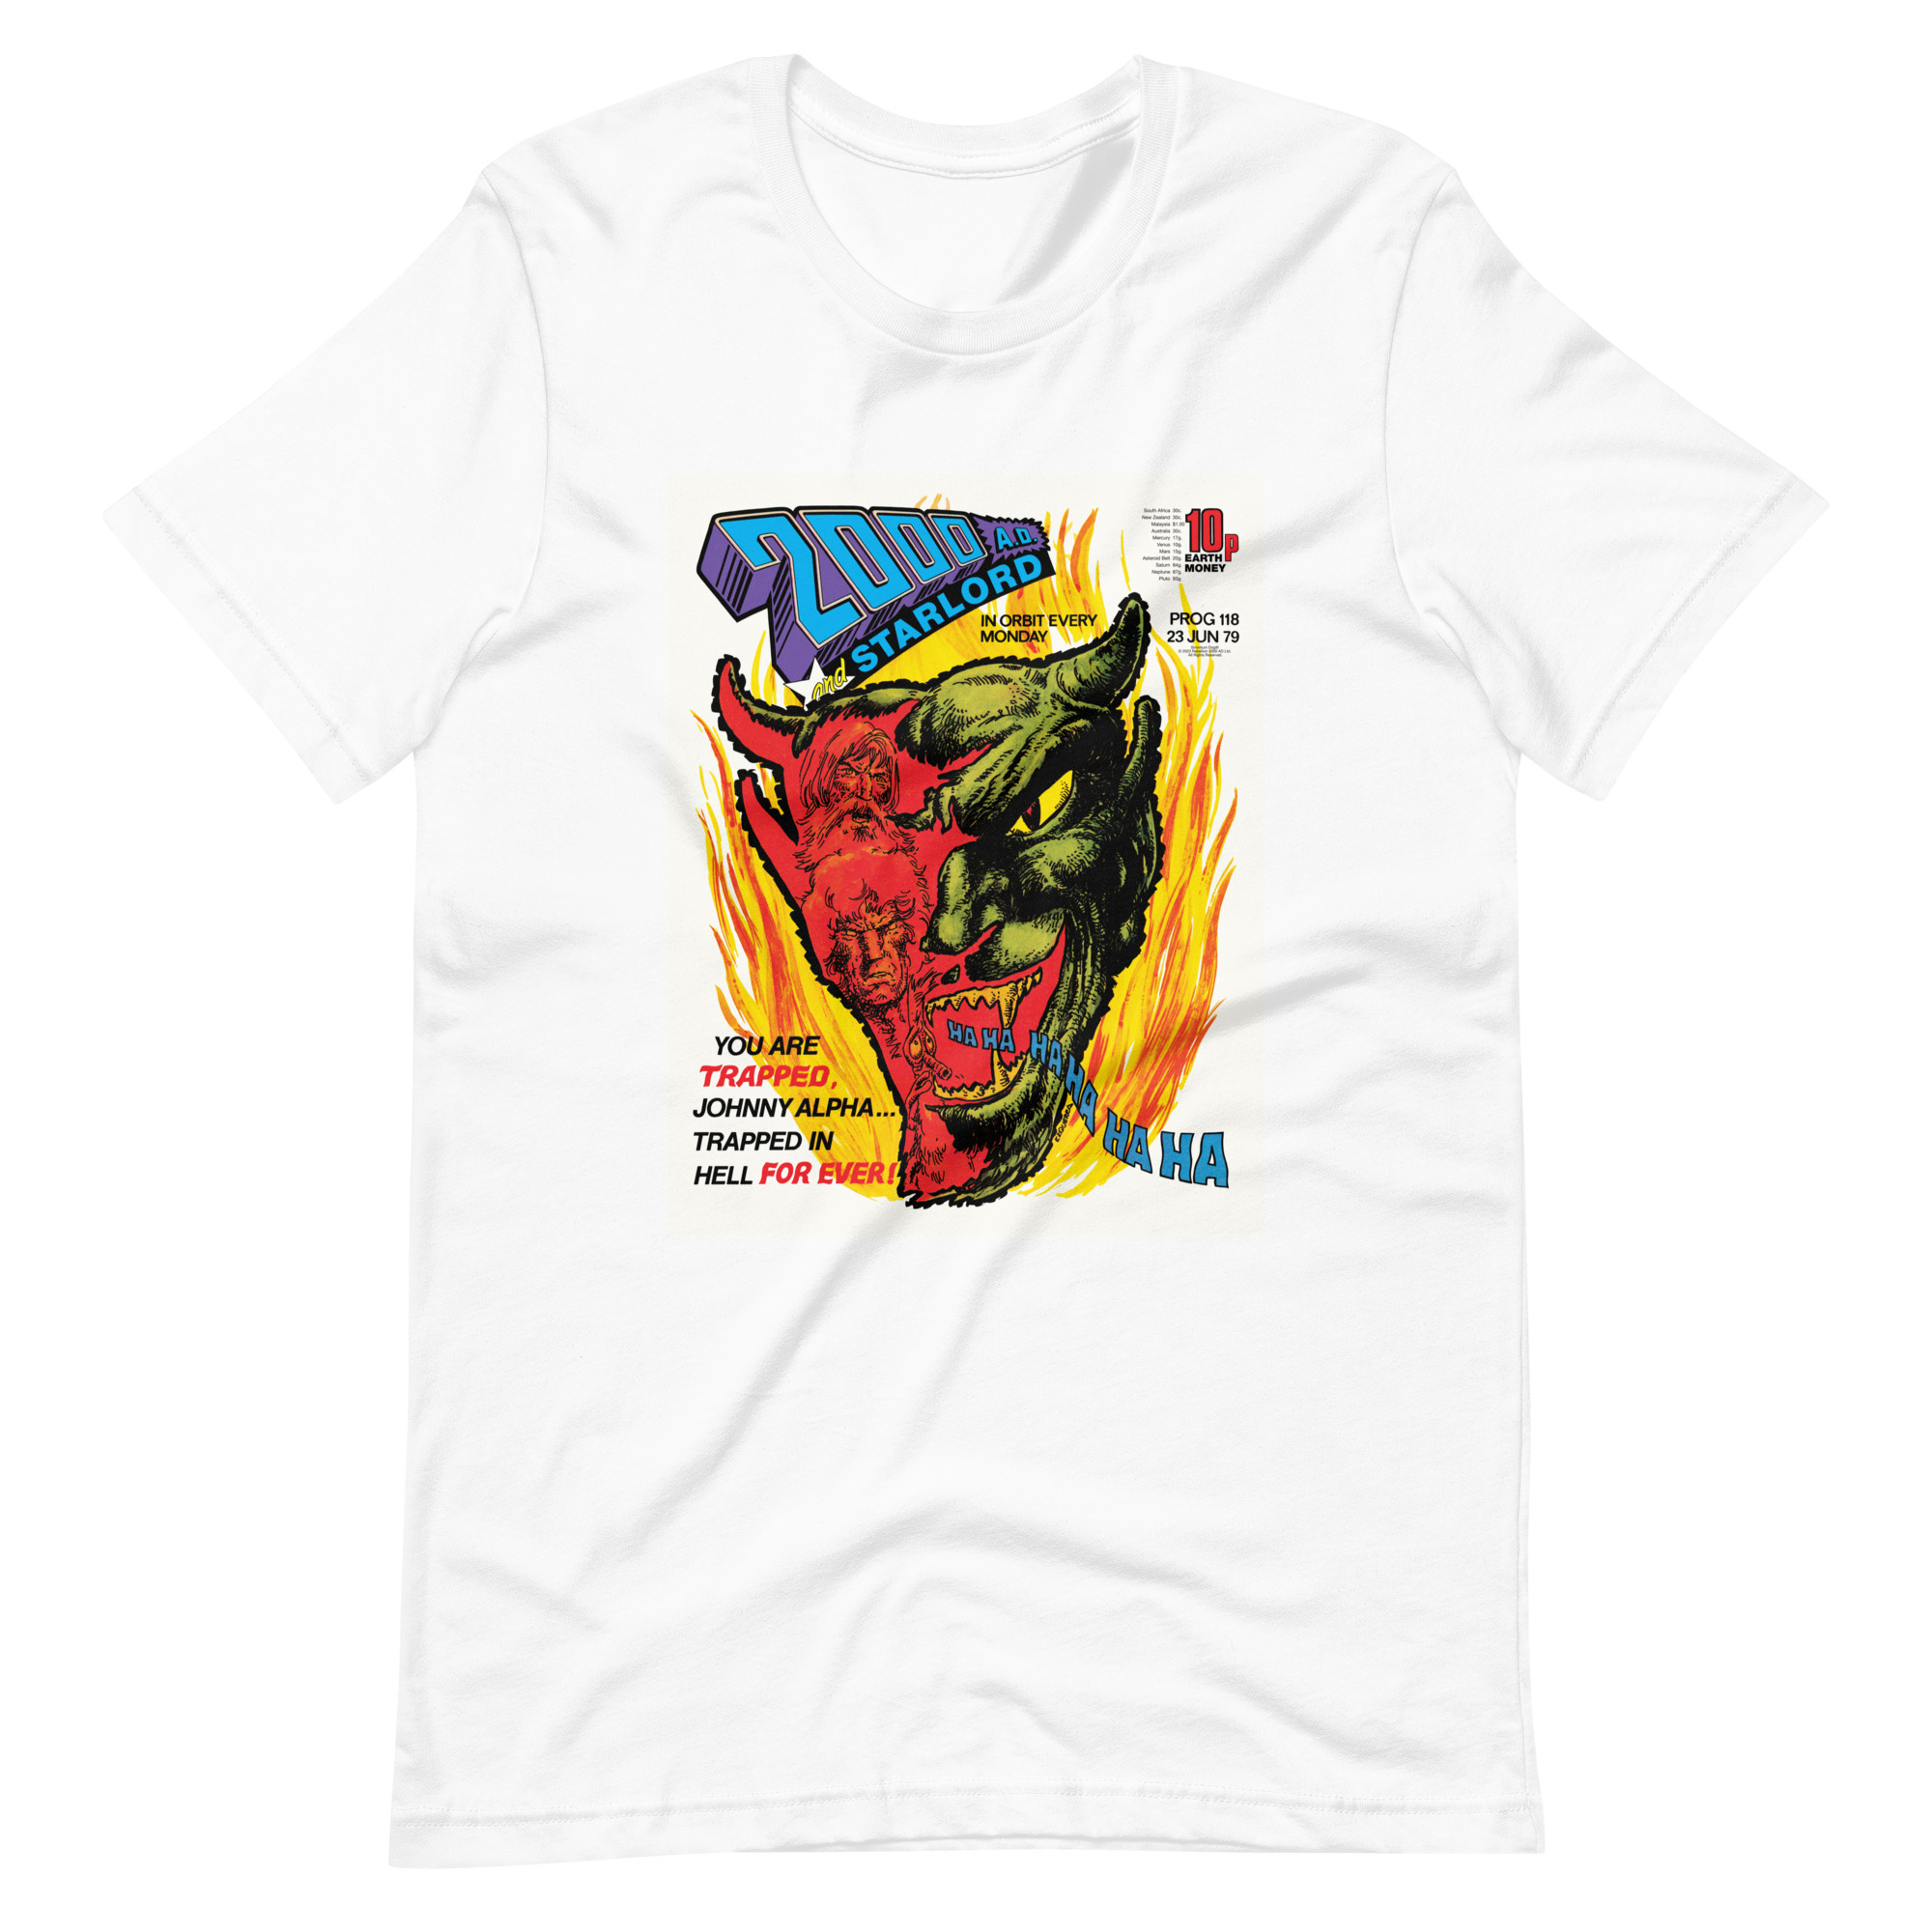 White Tshirt with an image on the chest. Image is cover of 2000 AD prog 118 and depicts a laughing Devil face in flames